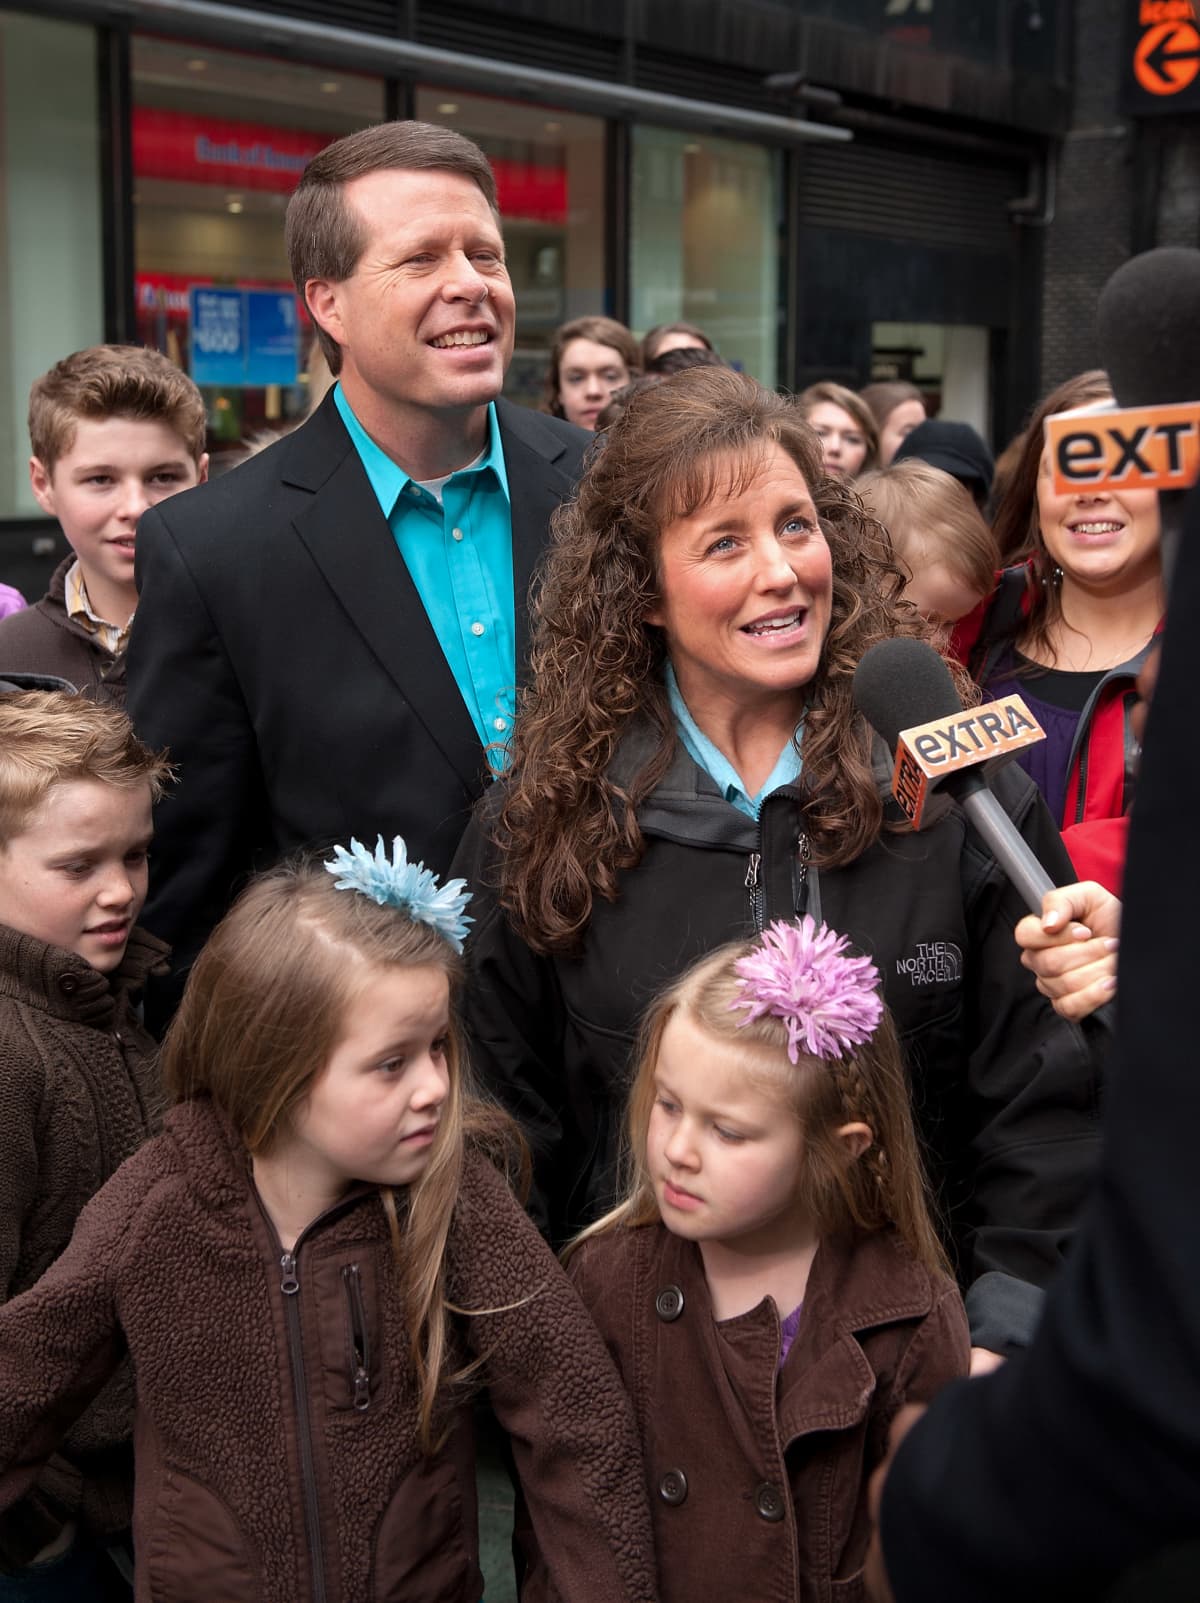 NEW YORK, NY - FEBRUARY 16:  Jim Bob Duggar and Michelle Duggar (from TLC's "19 Kids and Counting") pose backstage at the hit musical "Godspell" on Broadway at The Circle in The Square Theater on February 16, 2012 in New York City.  (Photo by Bruce Glikas/FilmMagic)